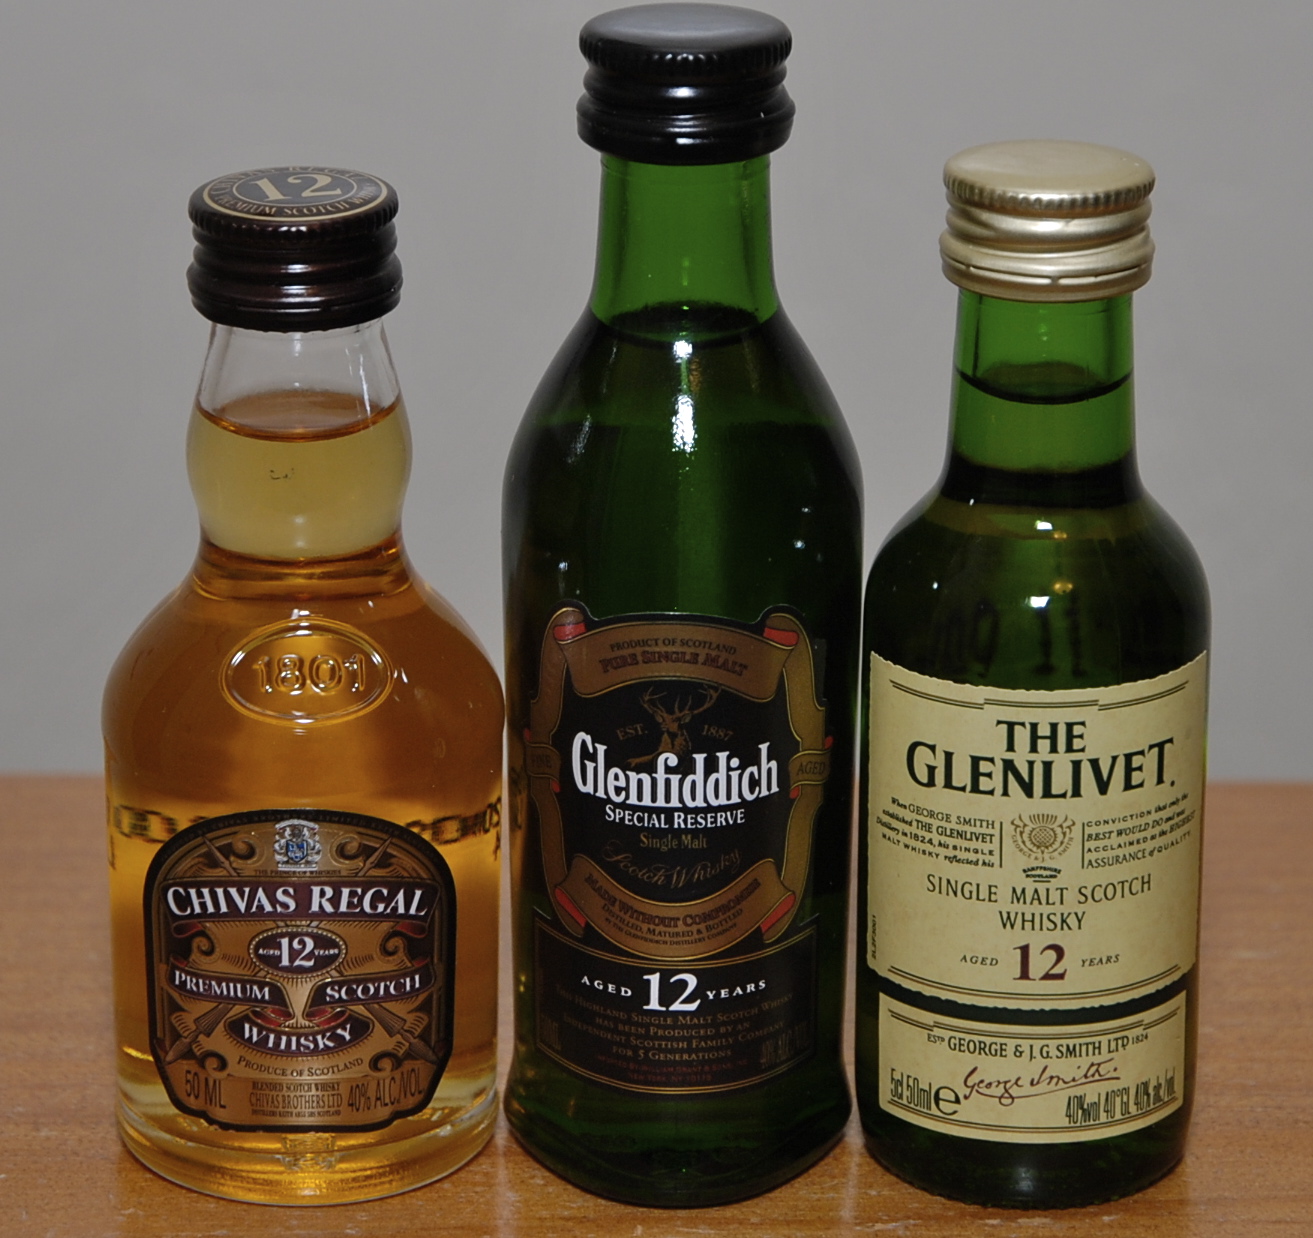 Two malts and a blend – Comparing three entry level